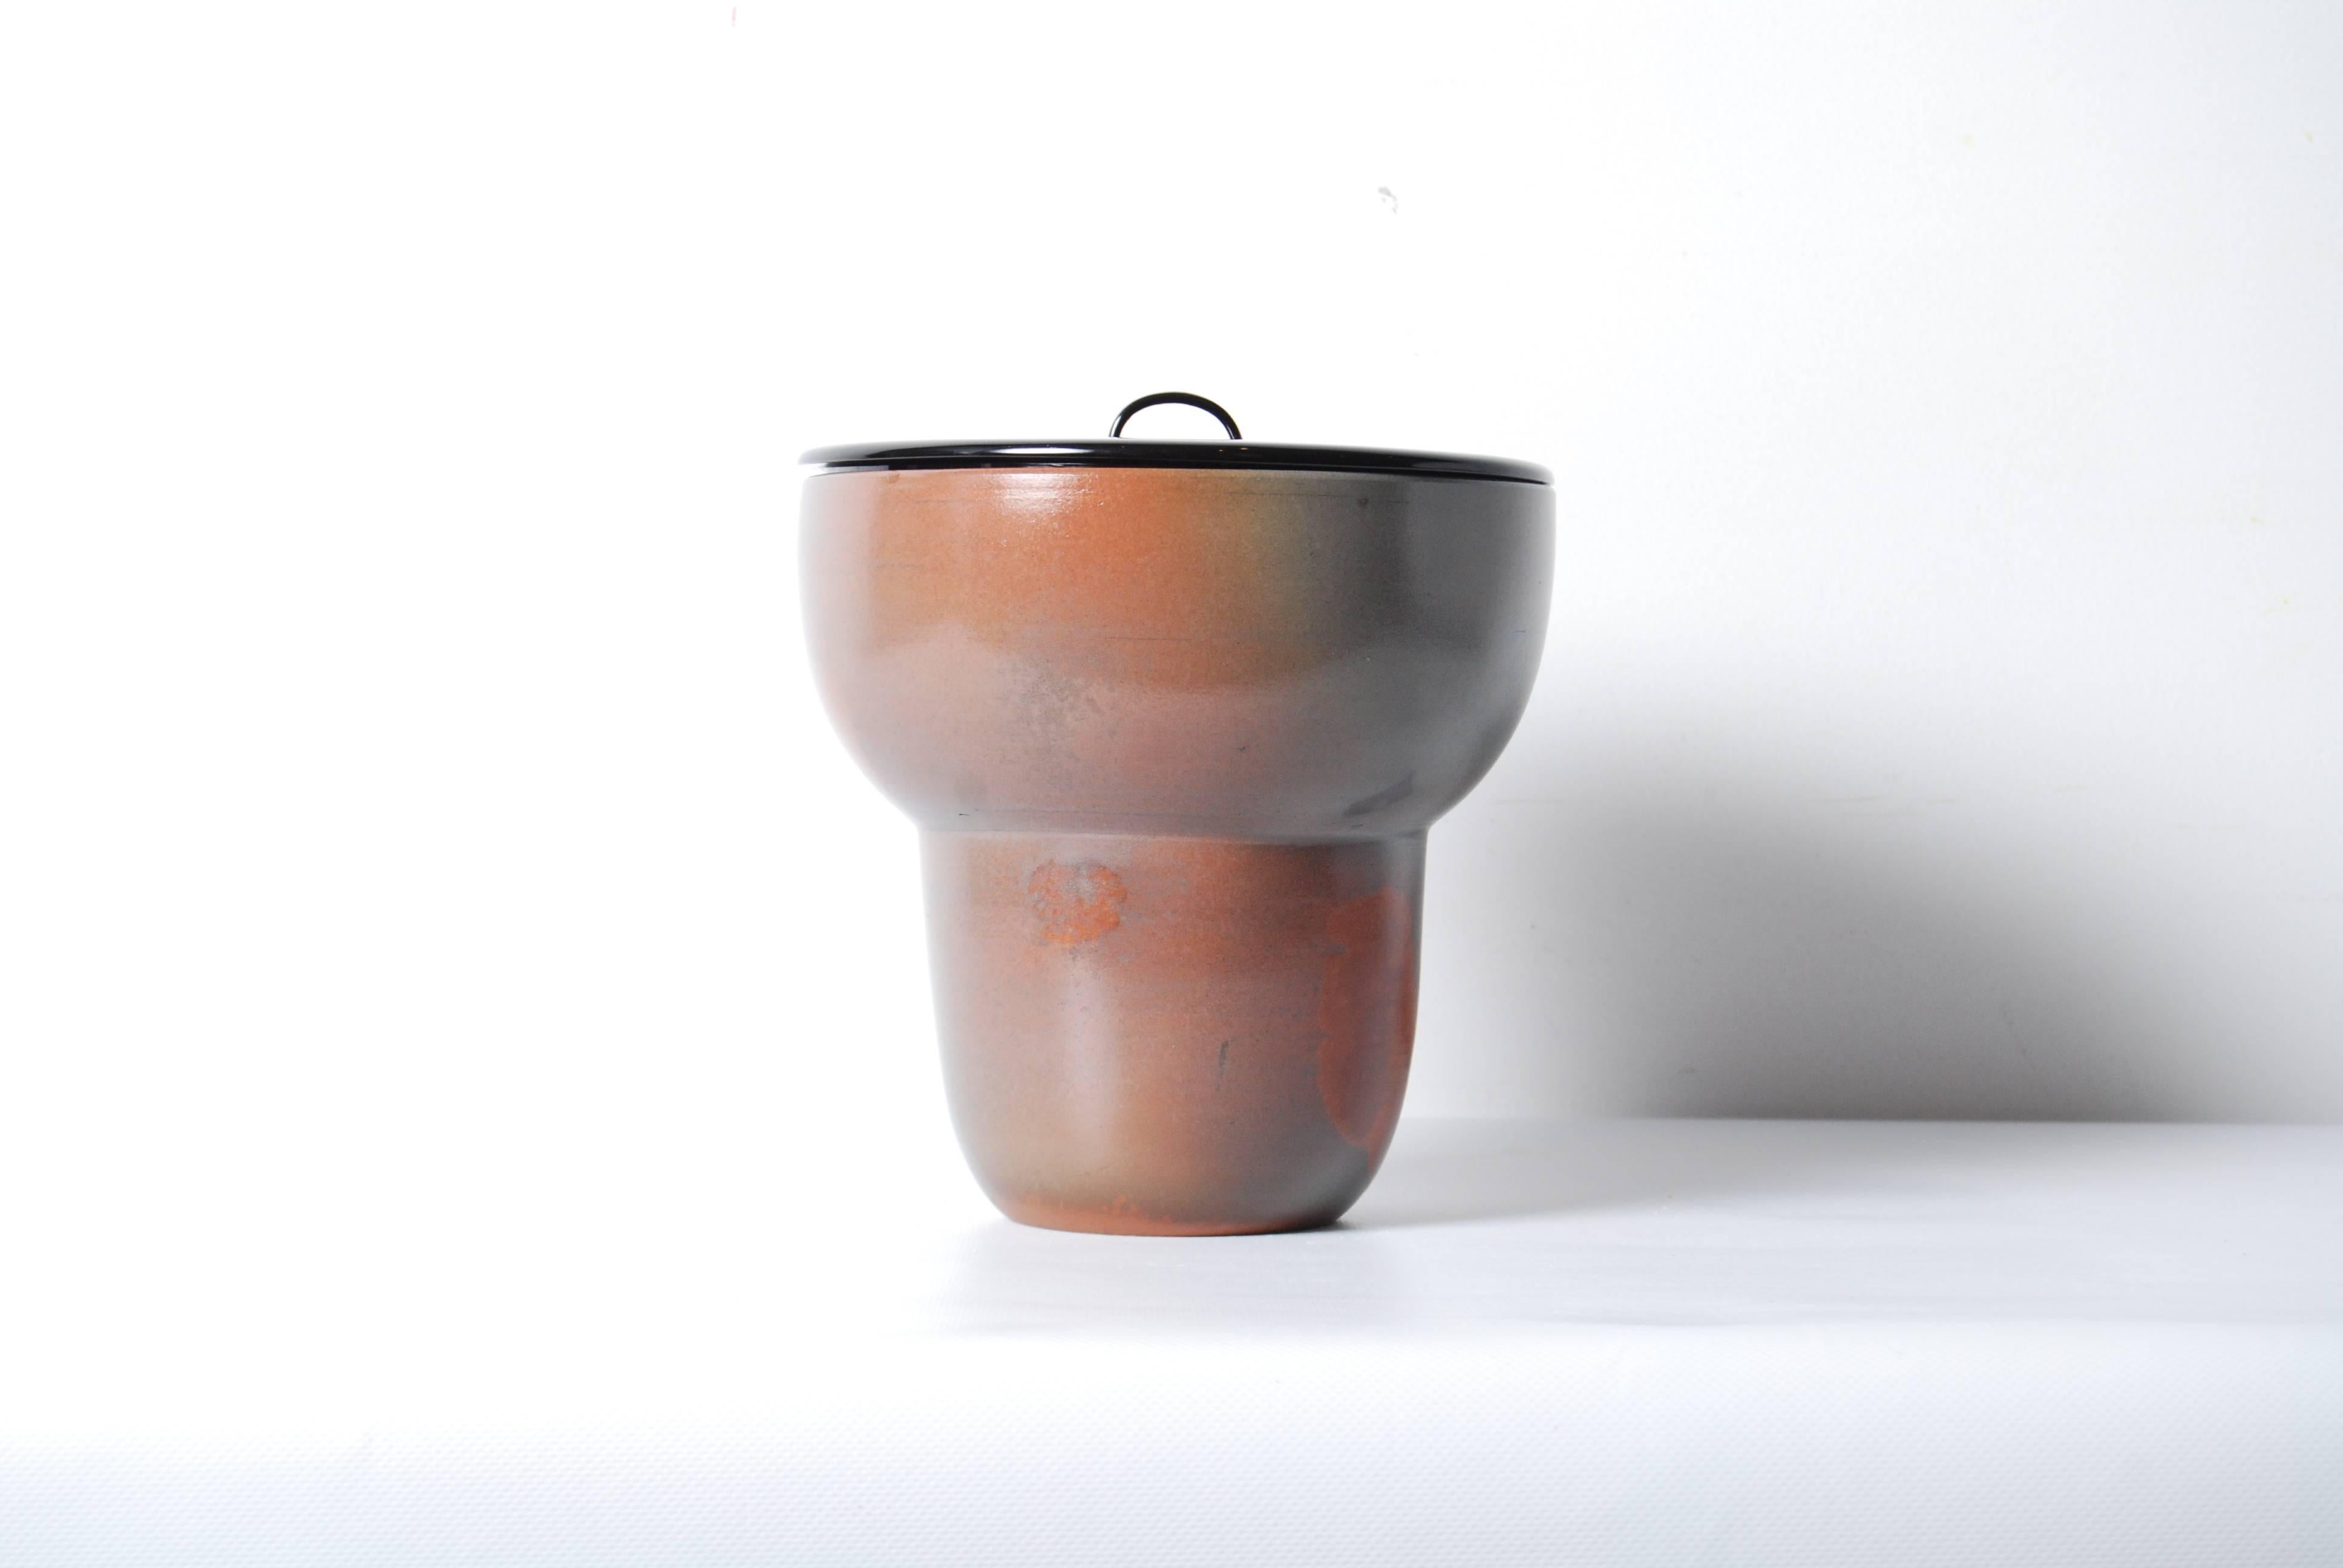 Japanese Bizen Pottery Mizusashi with Mottled Glaze and Black Lacquer Lid In Excellent Condition For Sale In Prahran, Victoria